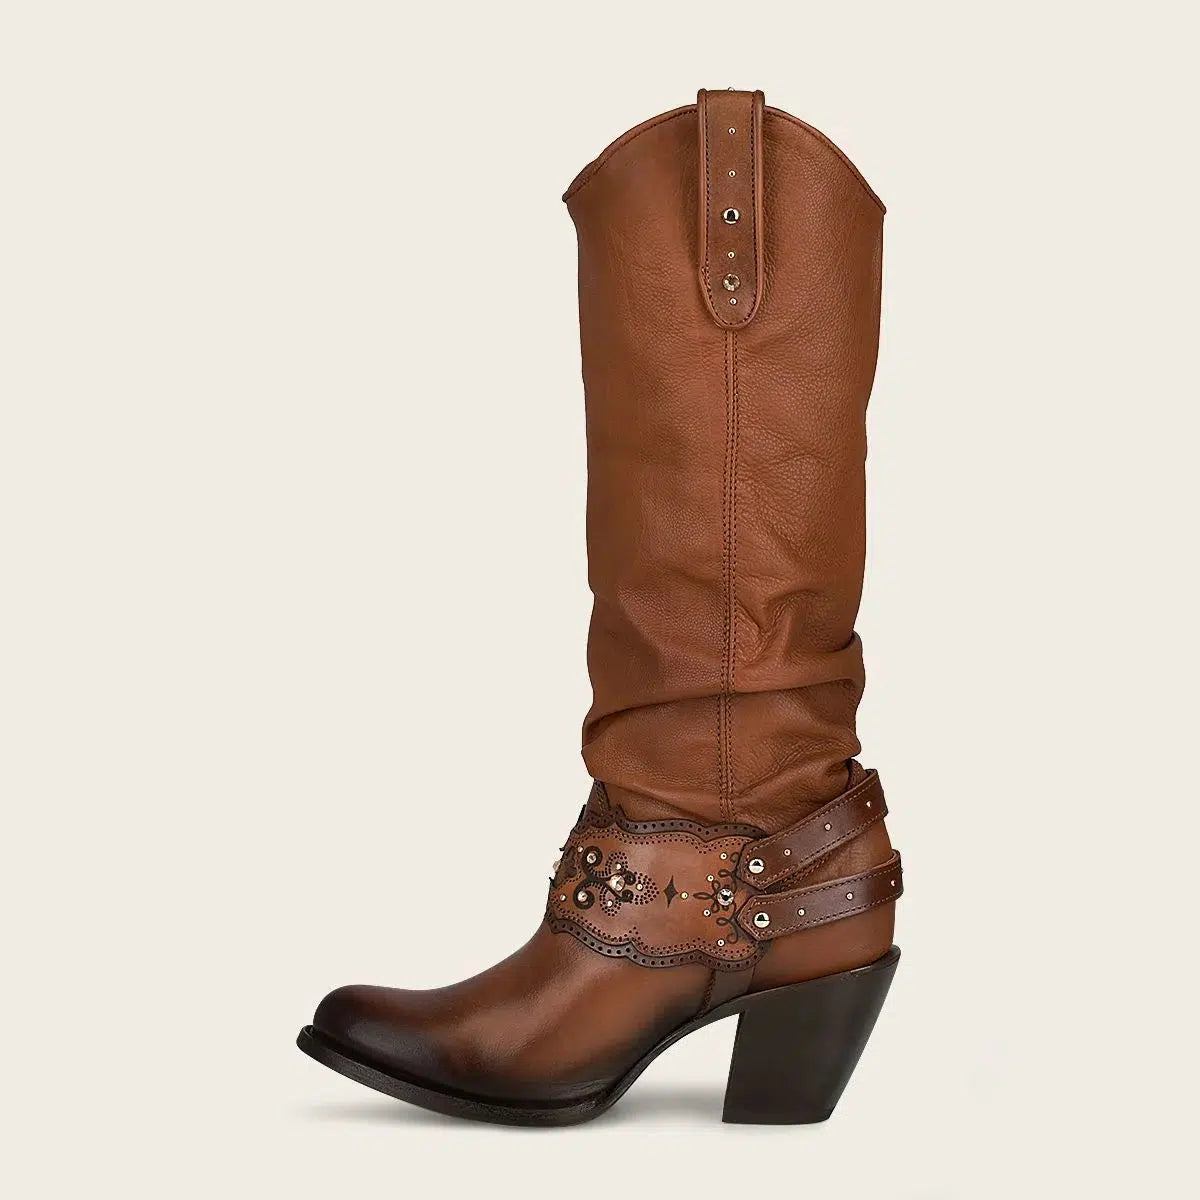 1Z41RS - Cuadra brown casual cowgirl leather knee high boots for women-Kuet.us